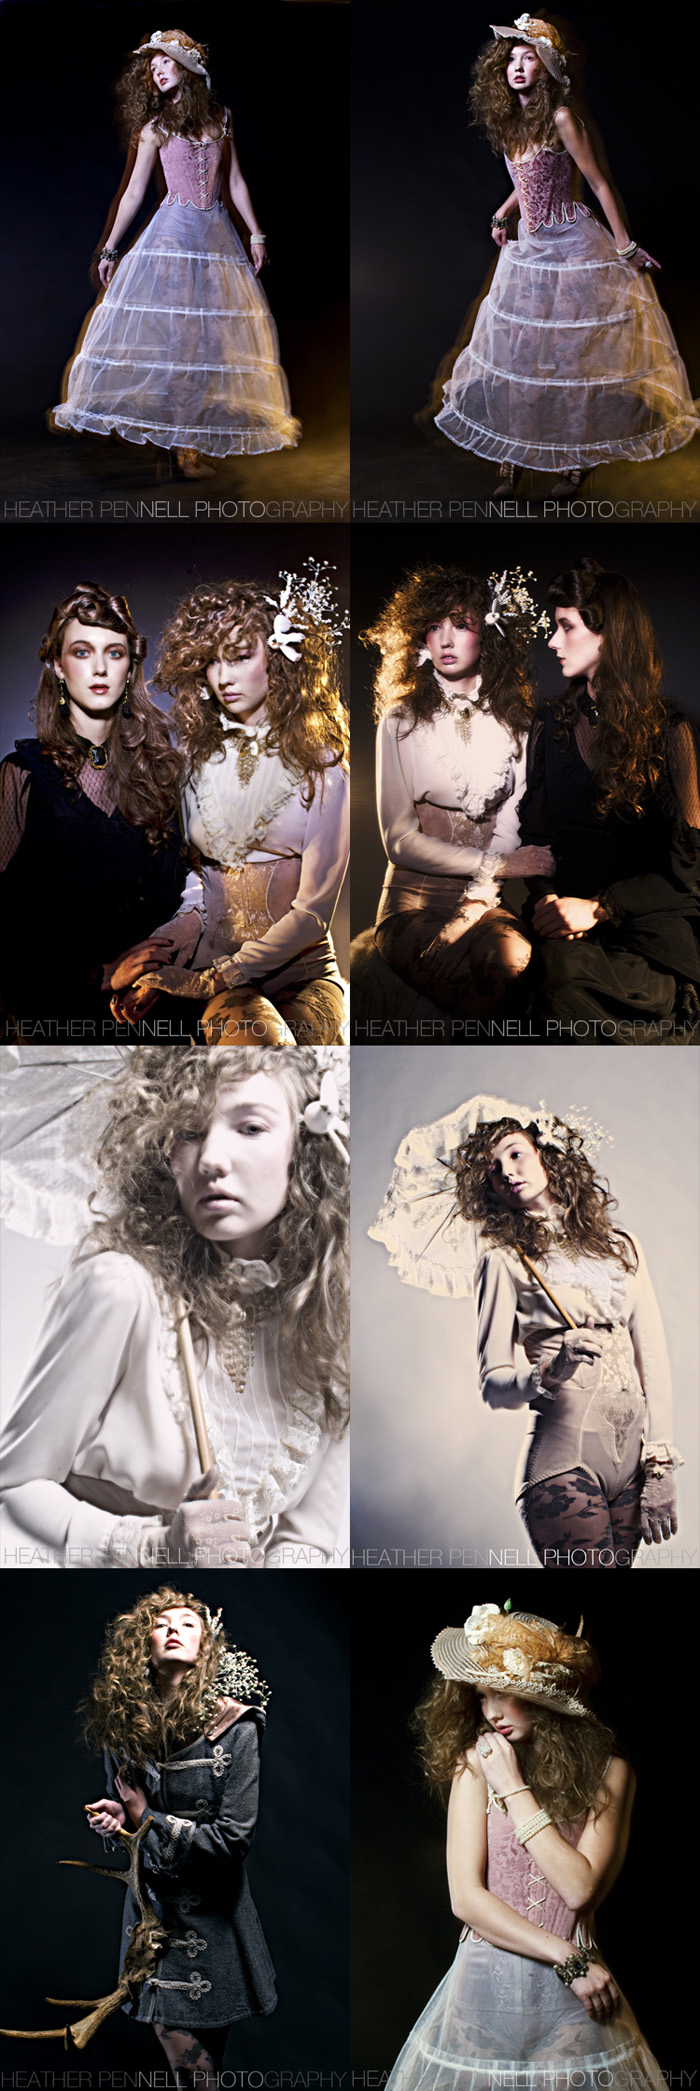 Female model photo shoot of Fields of Heather, Nicole Larson and Diandra Barsalou in Vancouver, BC, hair styled by Jesse Minty, wardrobe styled by DeFazio, makeup by Melanie Tremblay